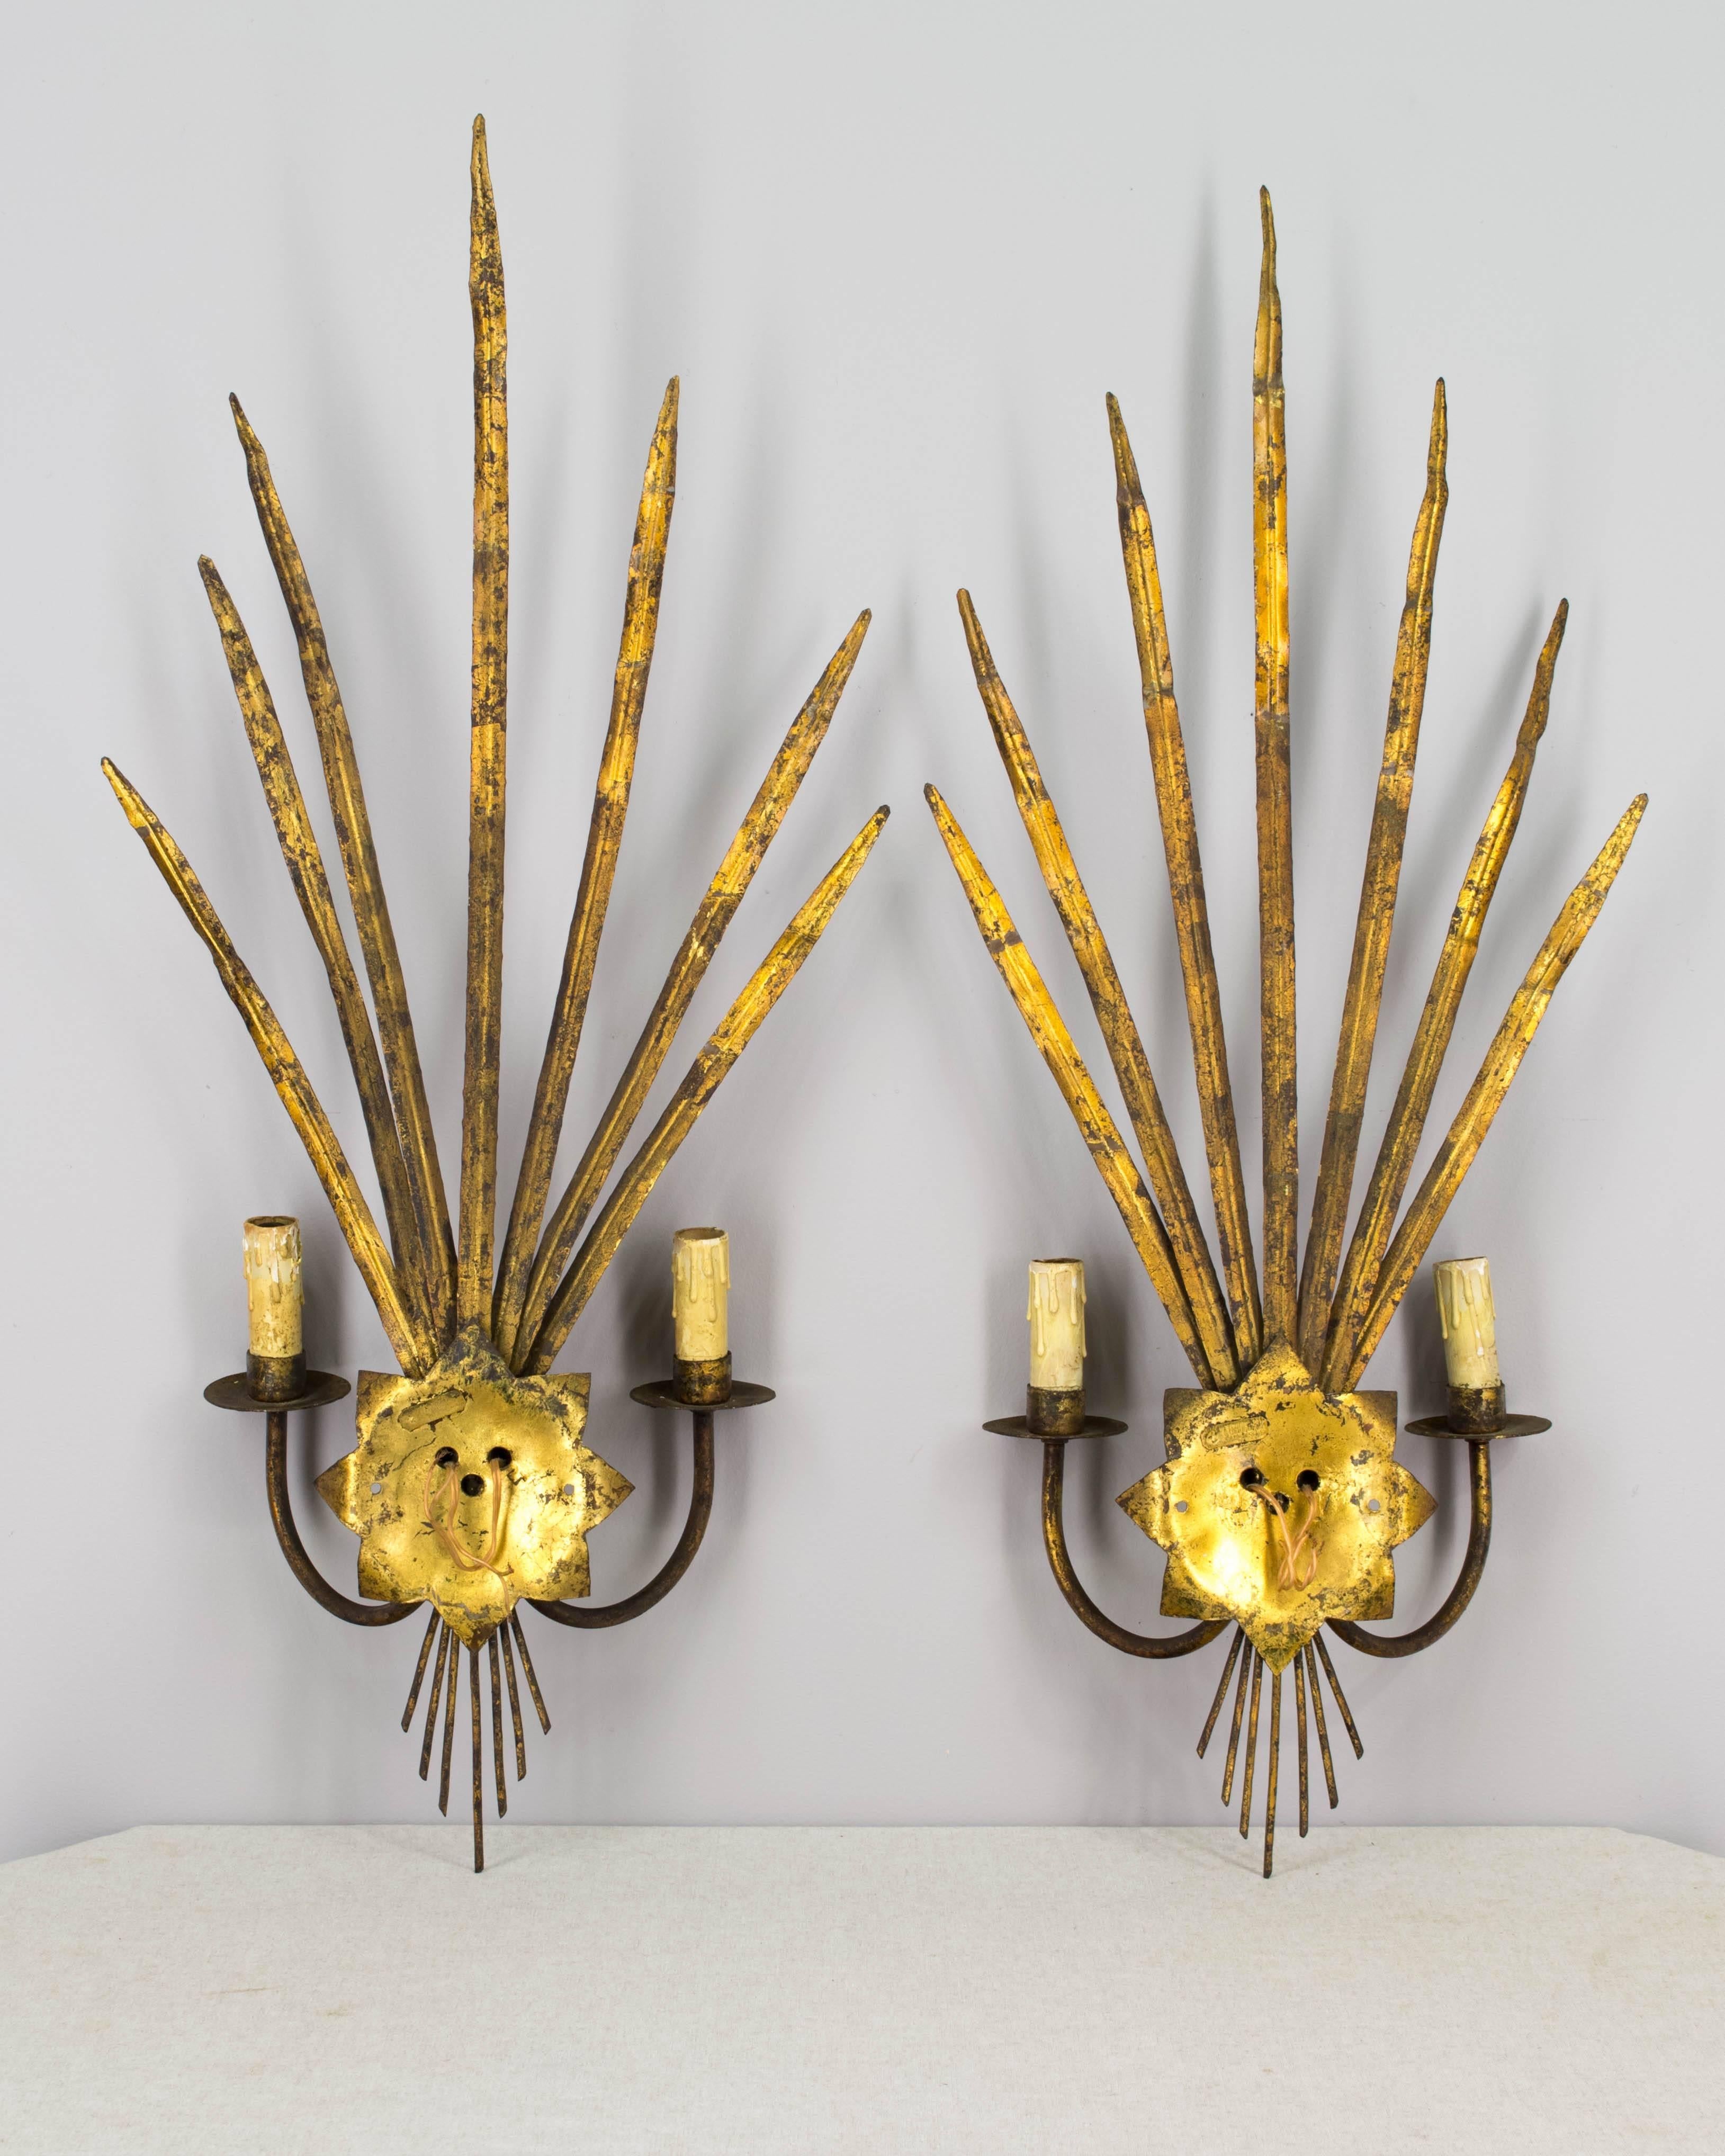 Pair of 20th century Spanish gilt metal sconces with palm leaf forms and two-light candlesticks. Old wiring with European sockets, these will need to be rewired. Metal tag on back reads: Ferro color made in Spain.